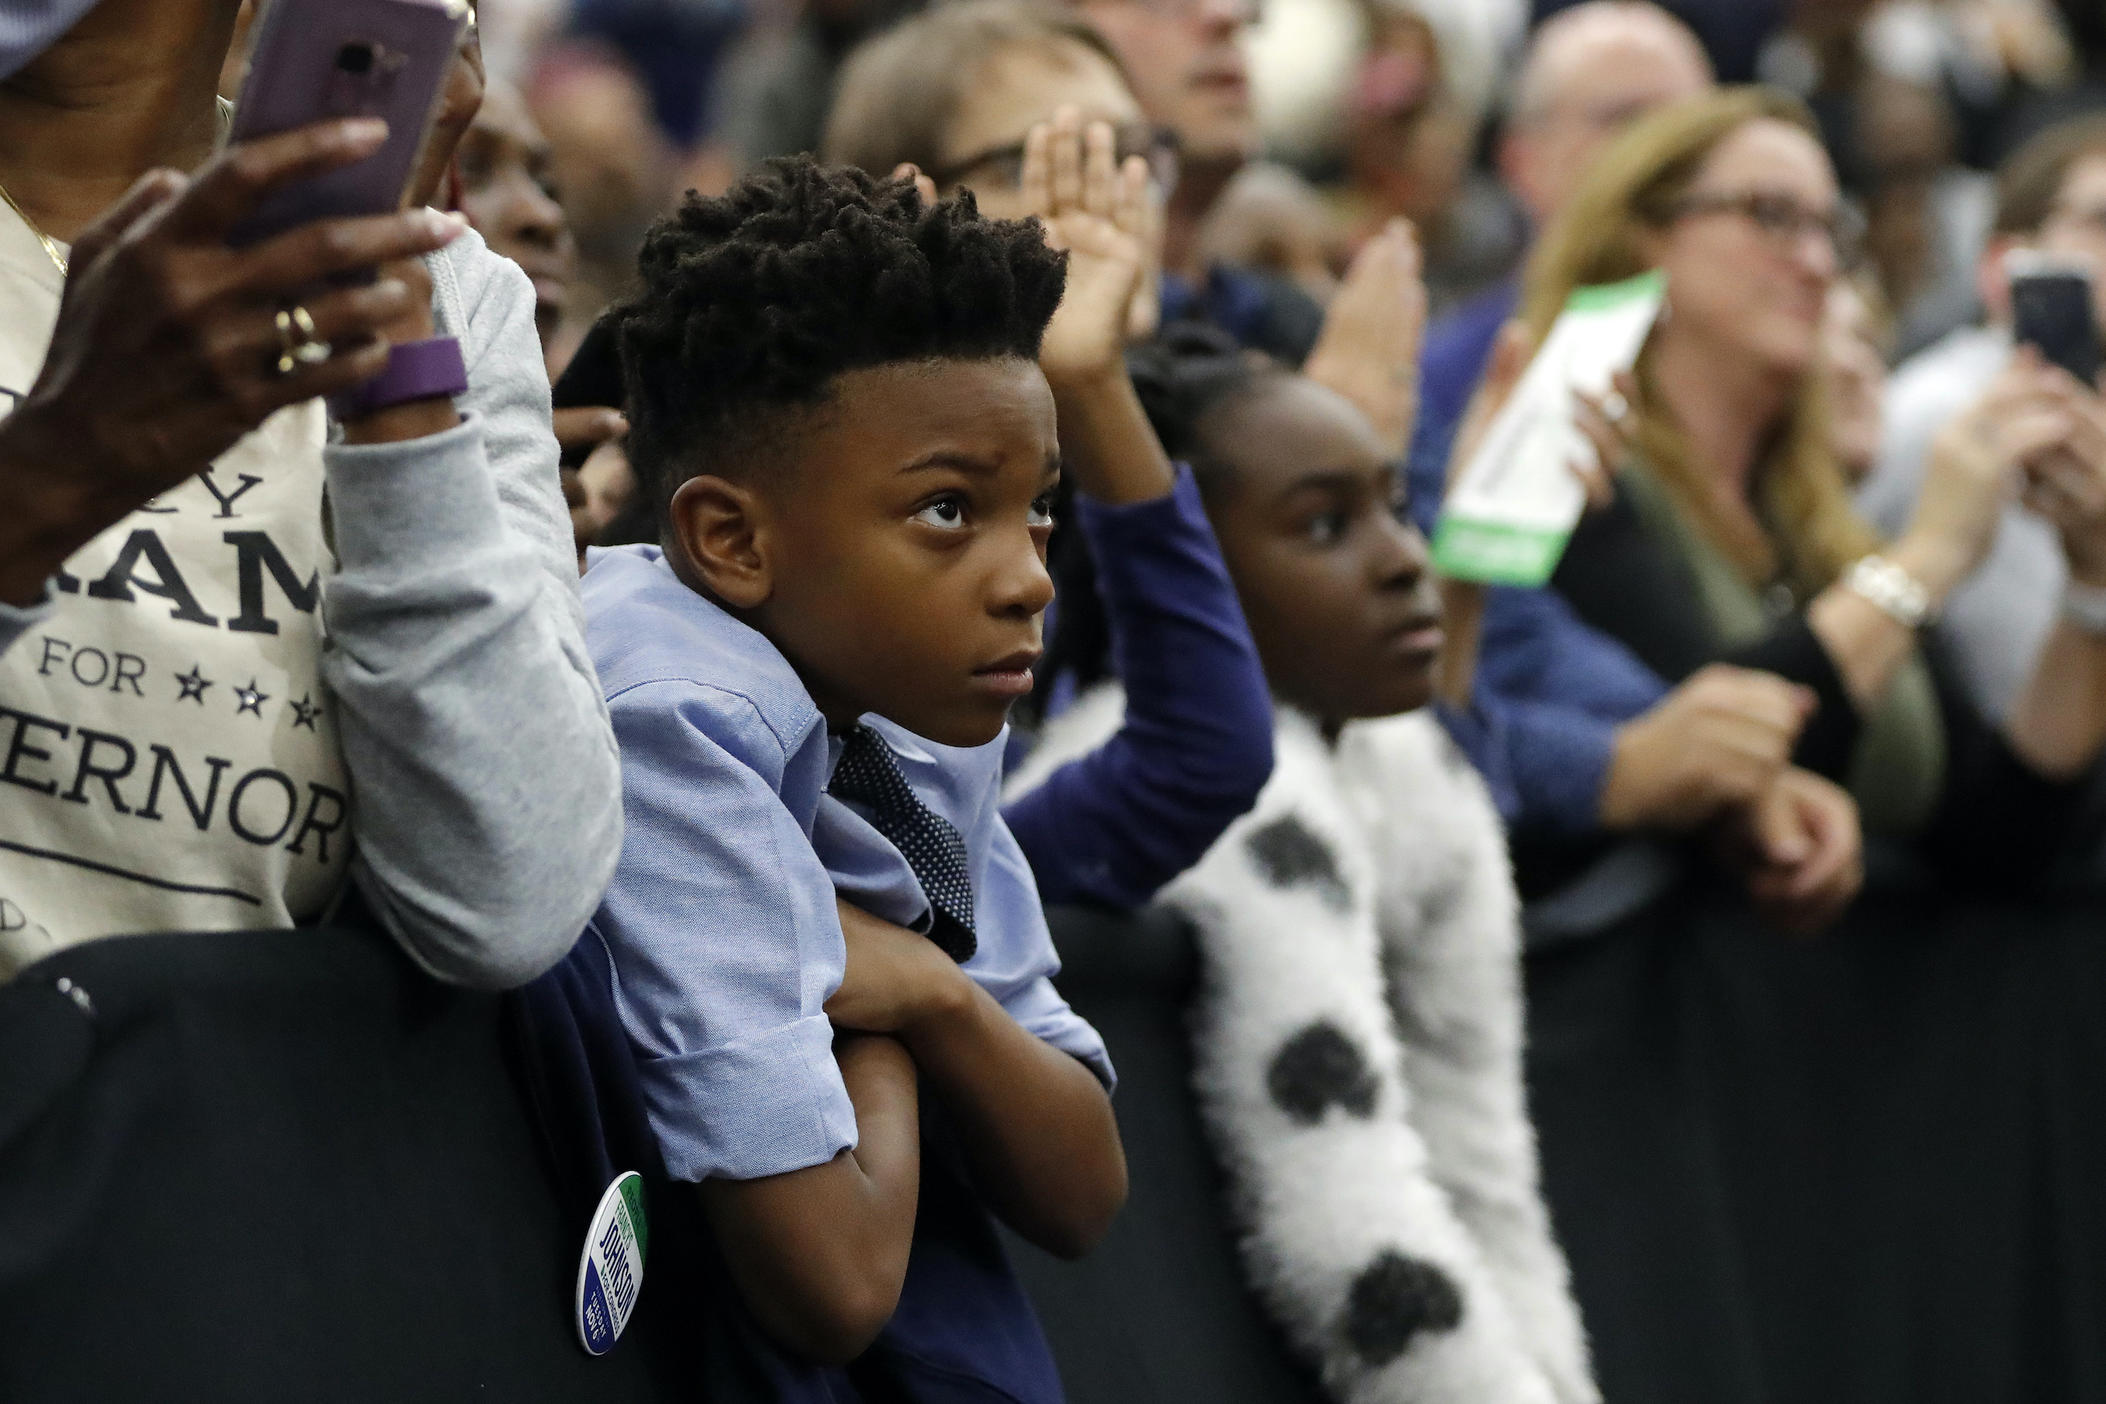 A young child watches as former President Barack Obama steps on stage to speak during a campaign rally for Georgia gubernatorial candidate Stacey Abrams at Morehouse College on Friday, Nov. 2, 2018, in Atlanta. 